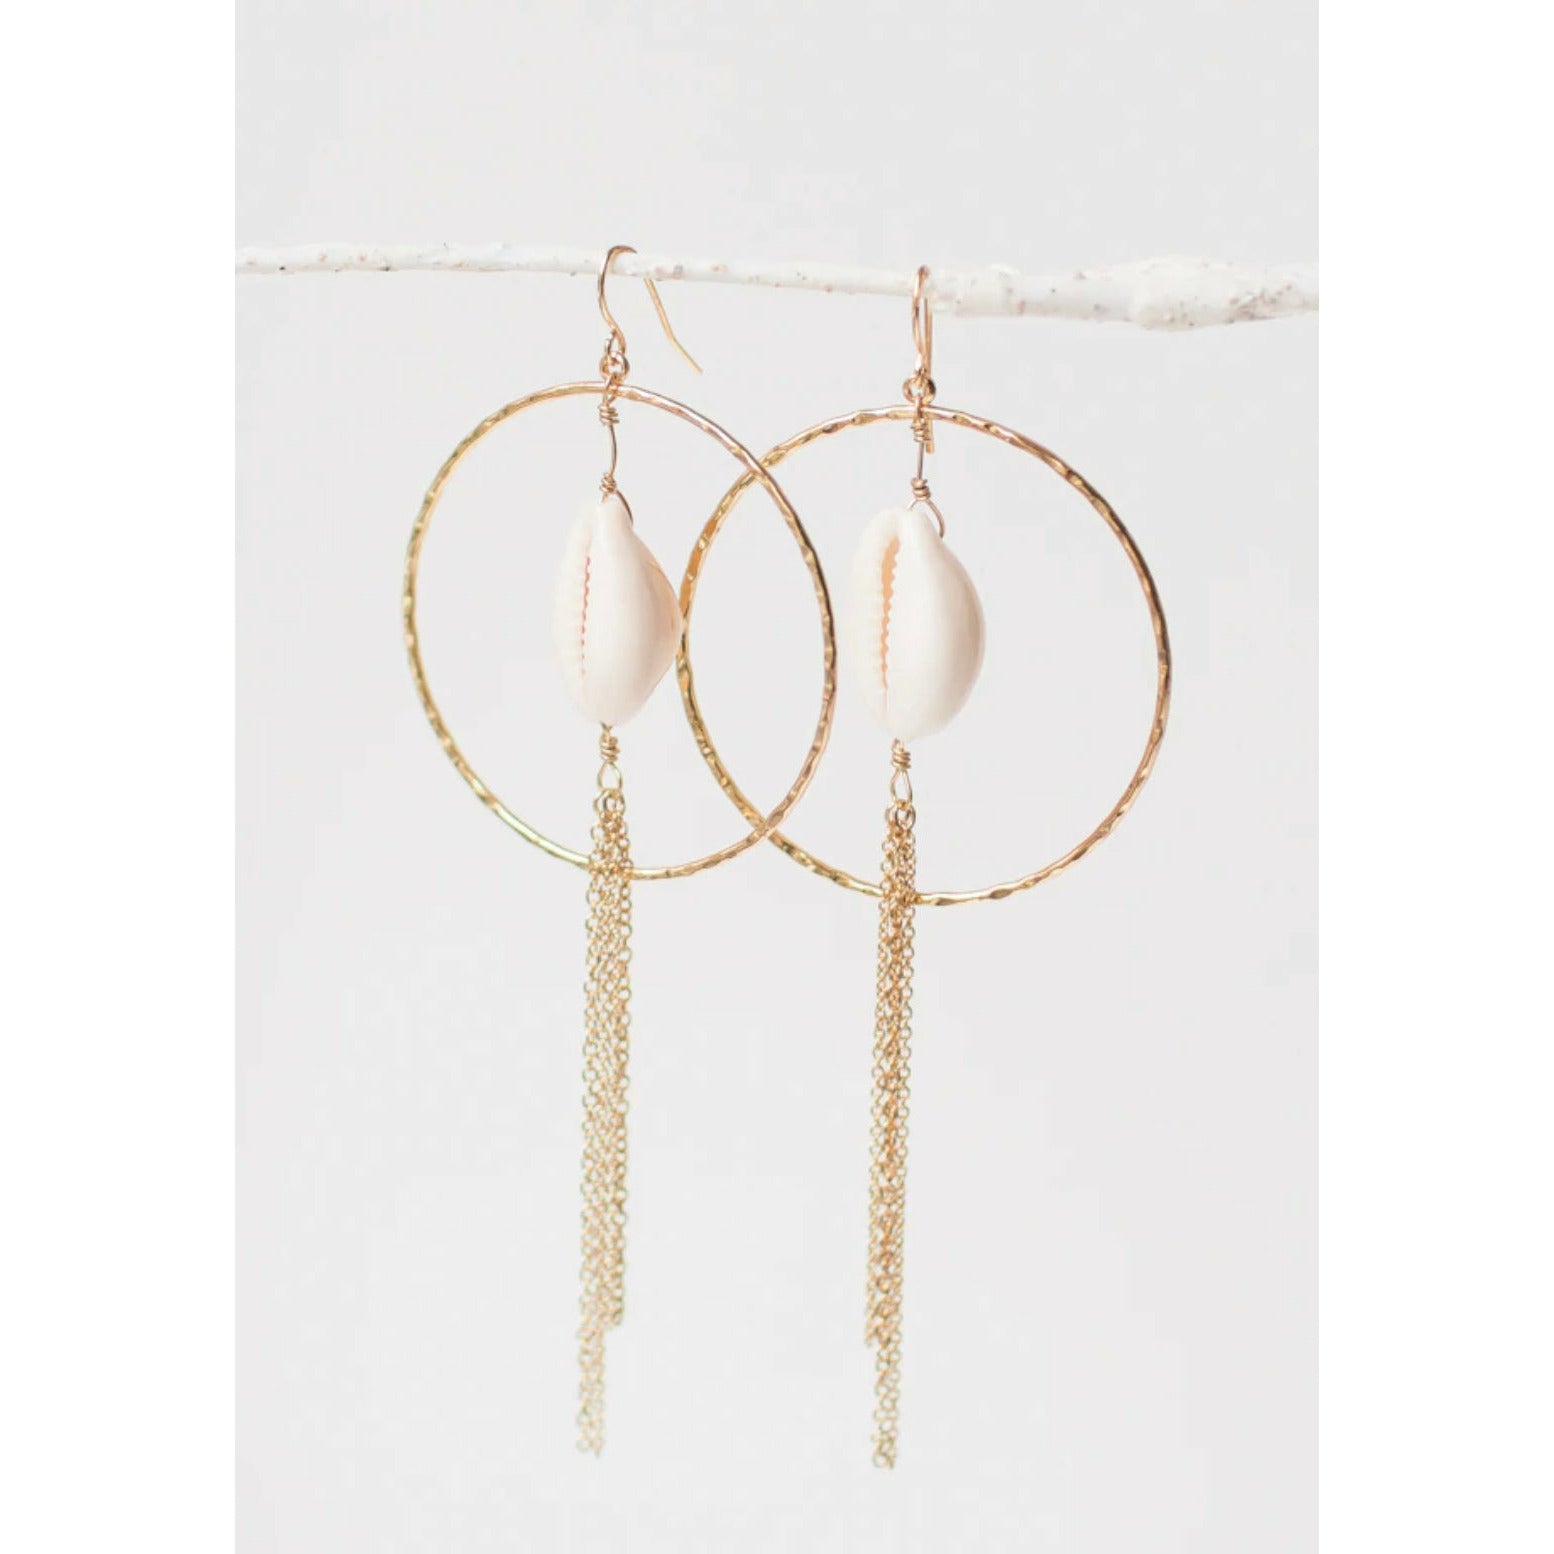 The Lucia Earring